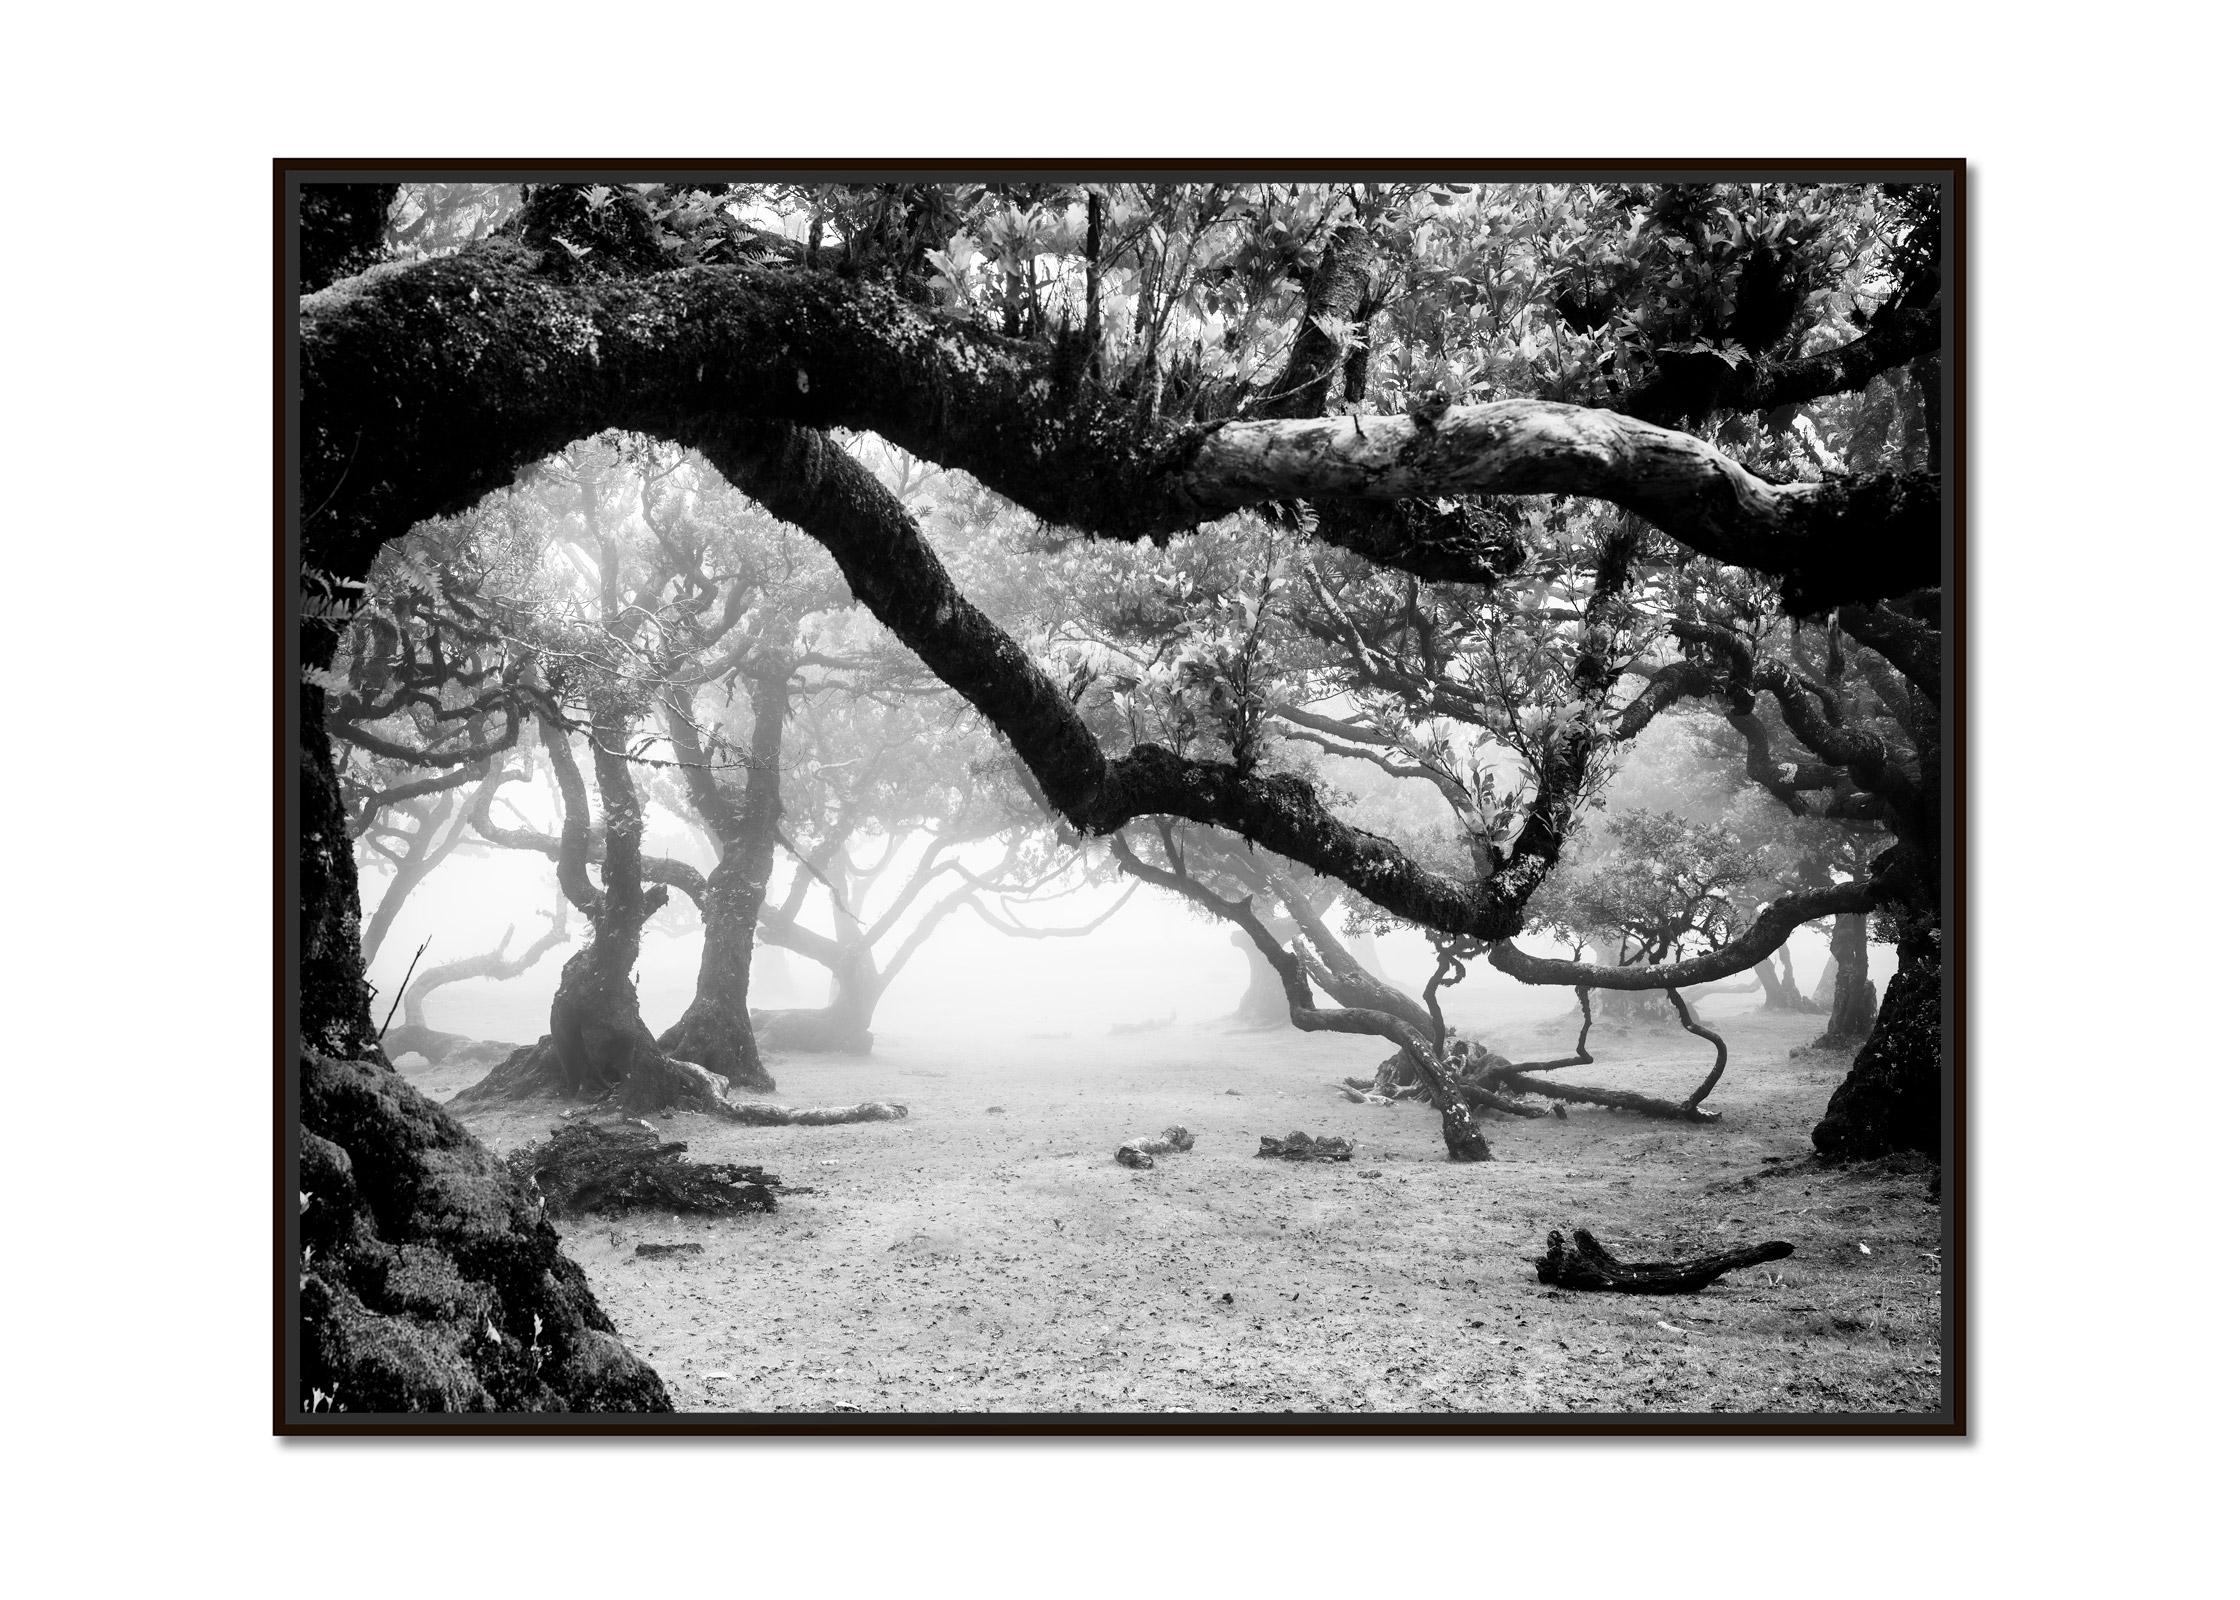 Ancient Laurisilva Forest, misty, magical trees, Madeira, B&W landscape print - Photograph by Gerald Berghammer